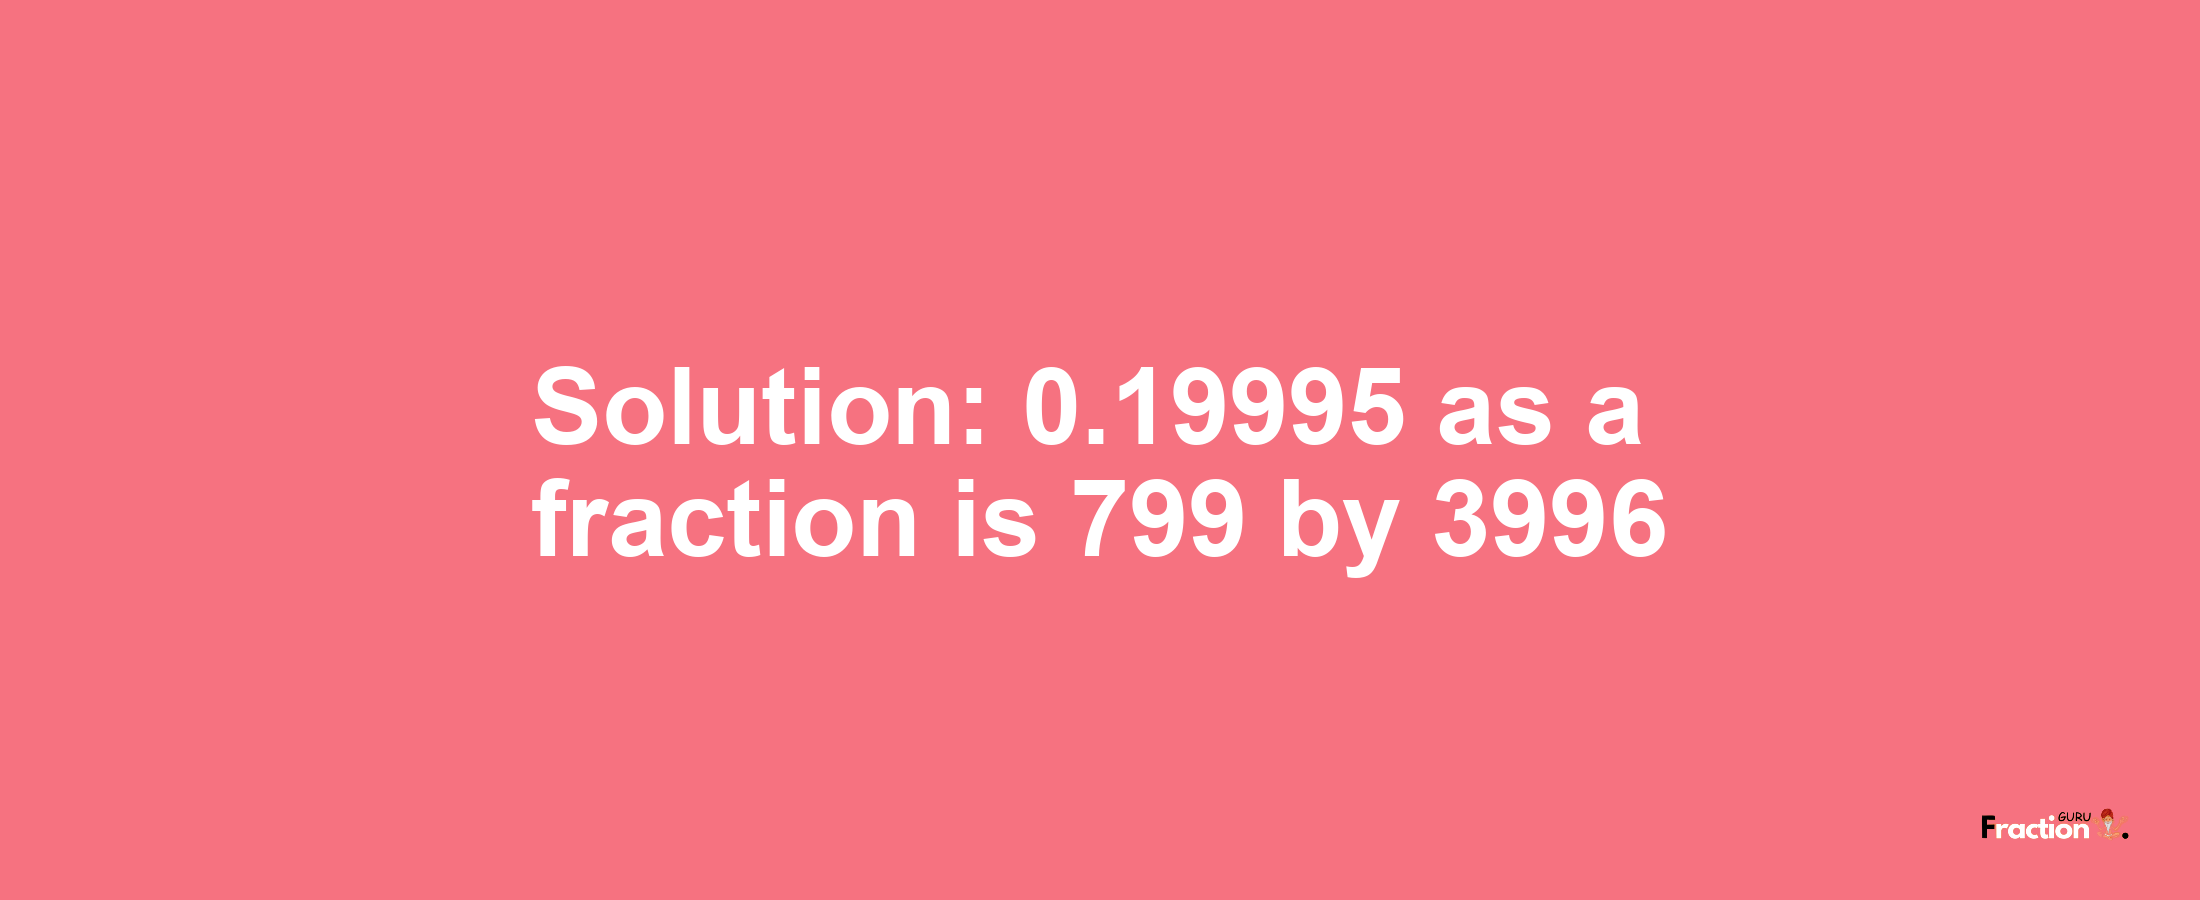 Solution:0.19995 as a fraction is 799/3996